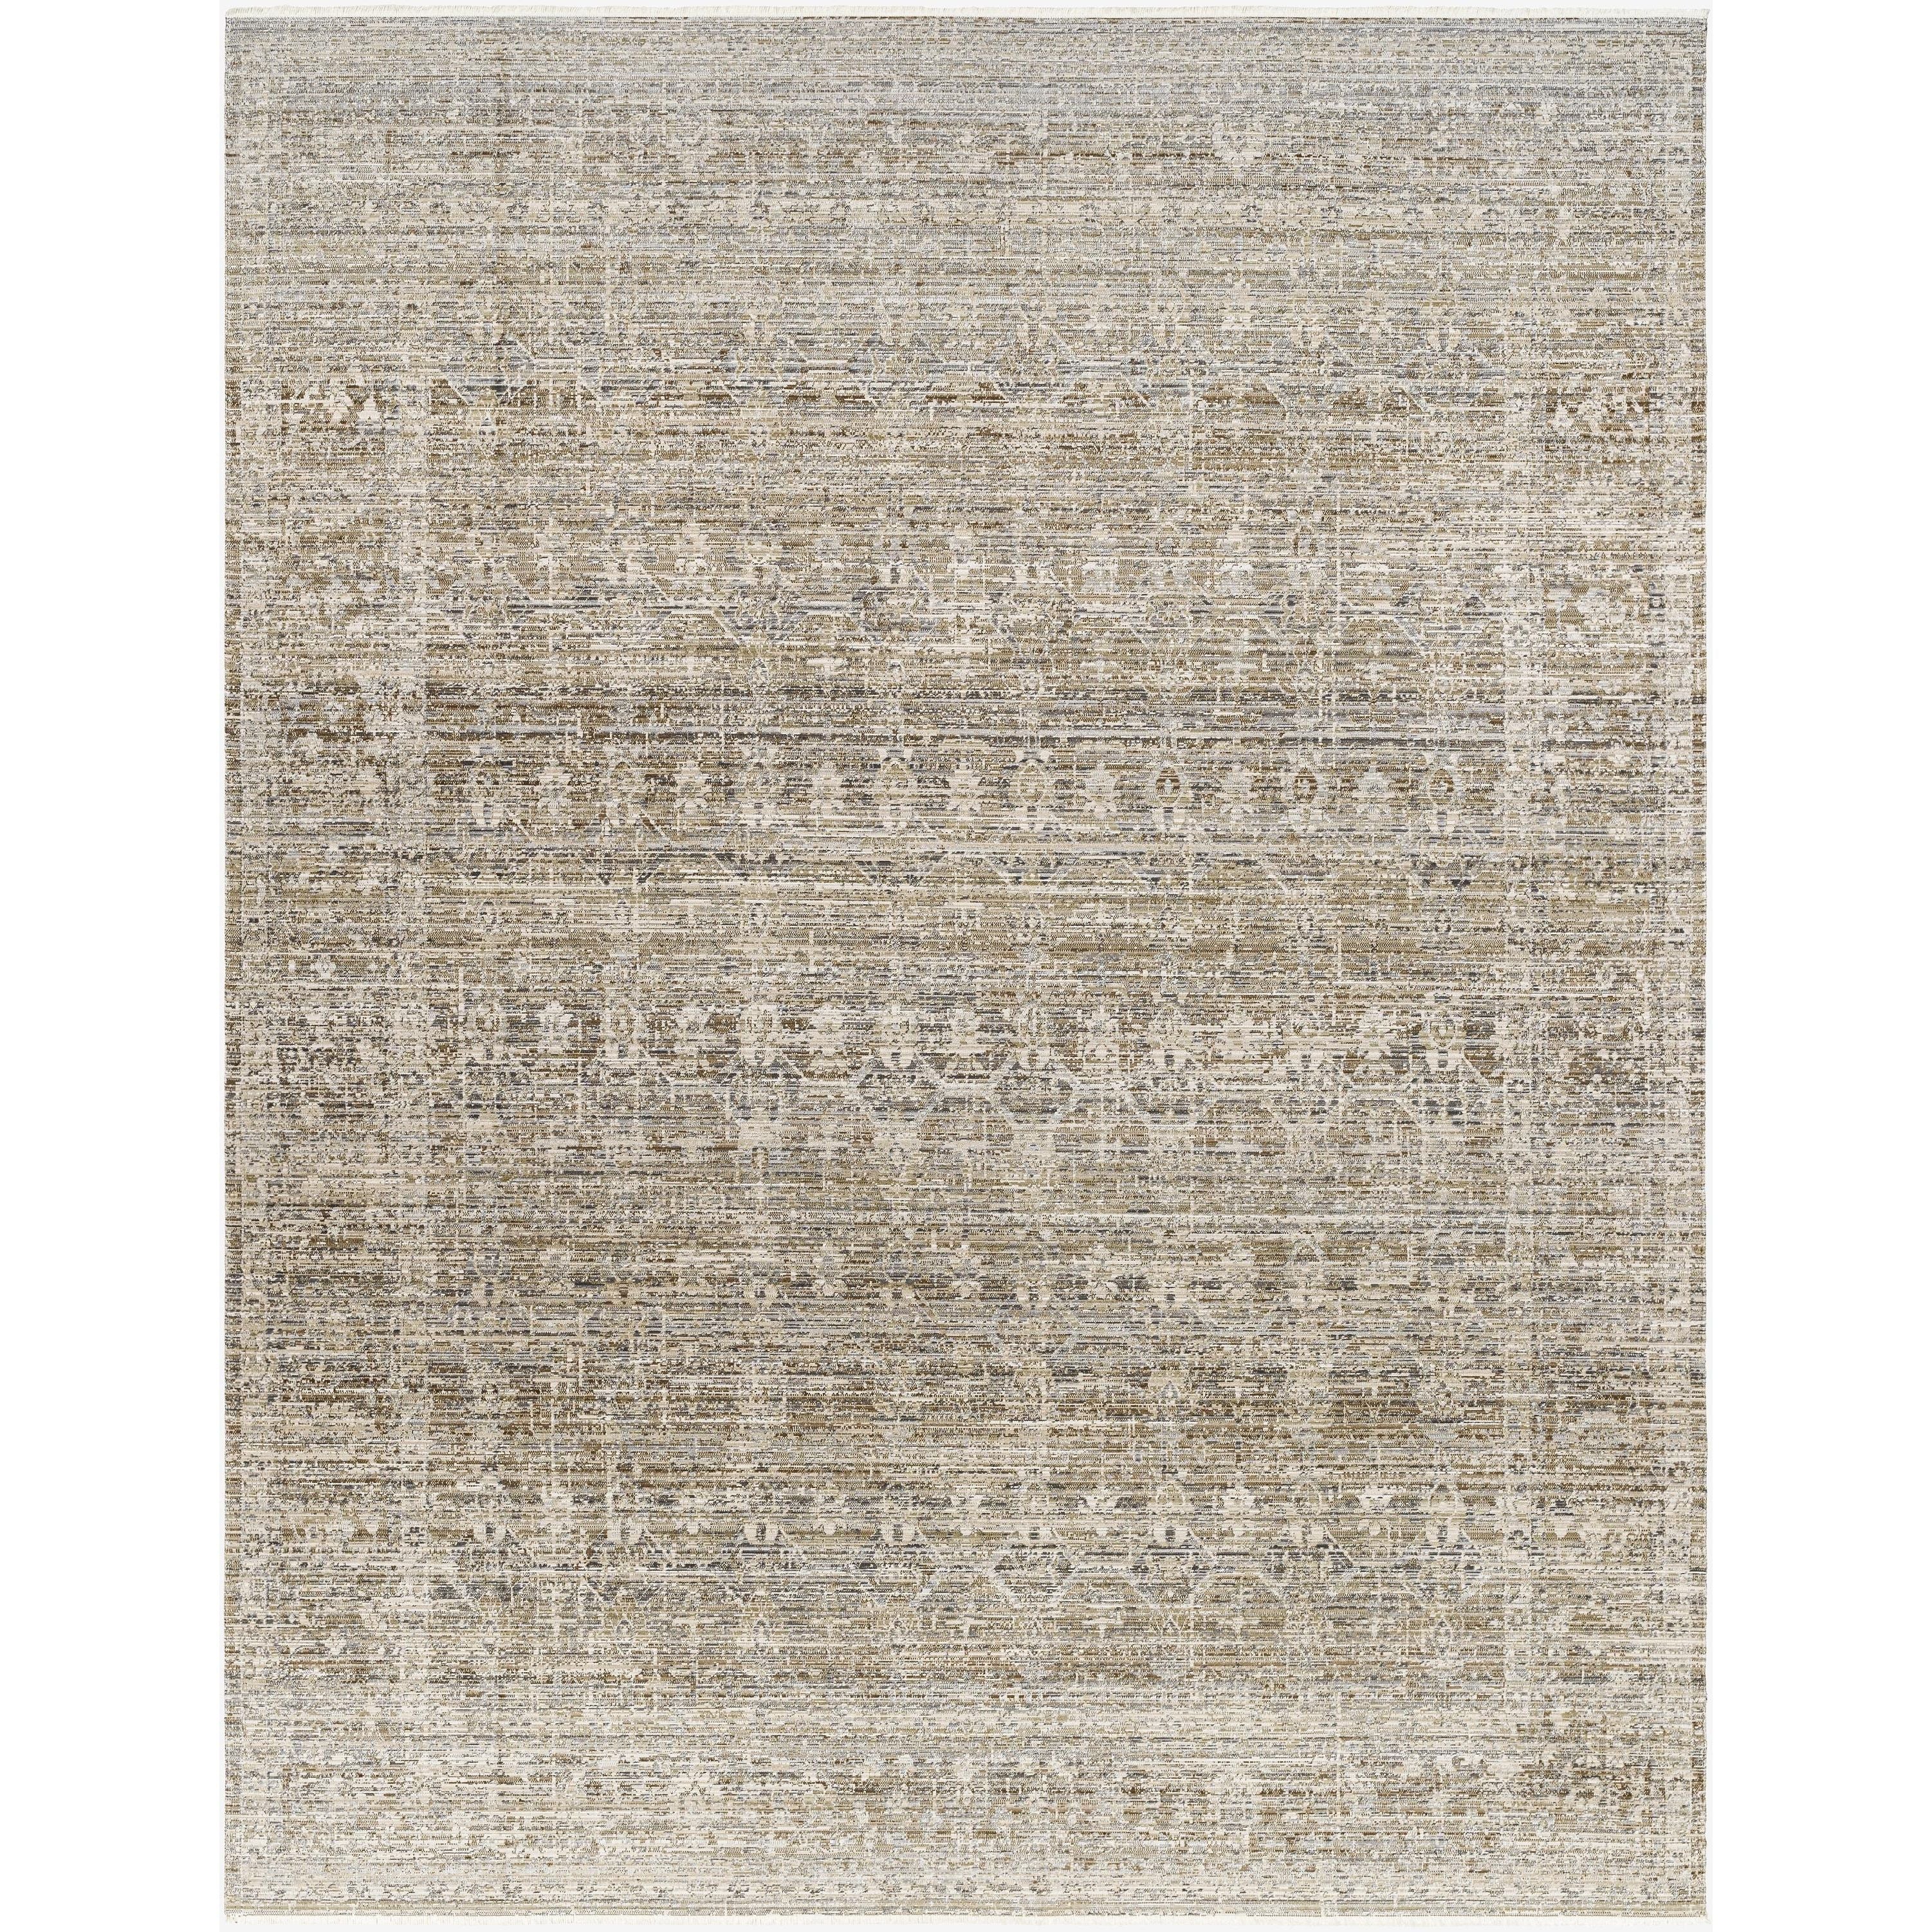 This exquisite Margaret area rug is the perfect addition to any home. The special collaboration piece from Becki Owens x Surya brings together beautiful vintage inspired style and modern craftsmanship. Amethyst Home provides interior design, new home construction design consulting, vintage area rugs, and lighting in the Los Angeles metro area.